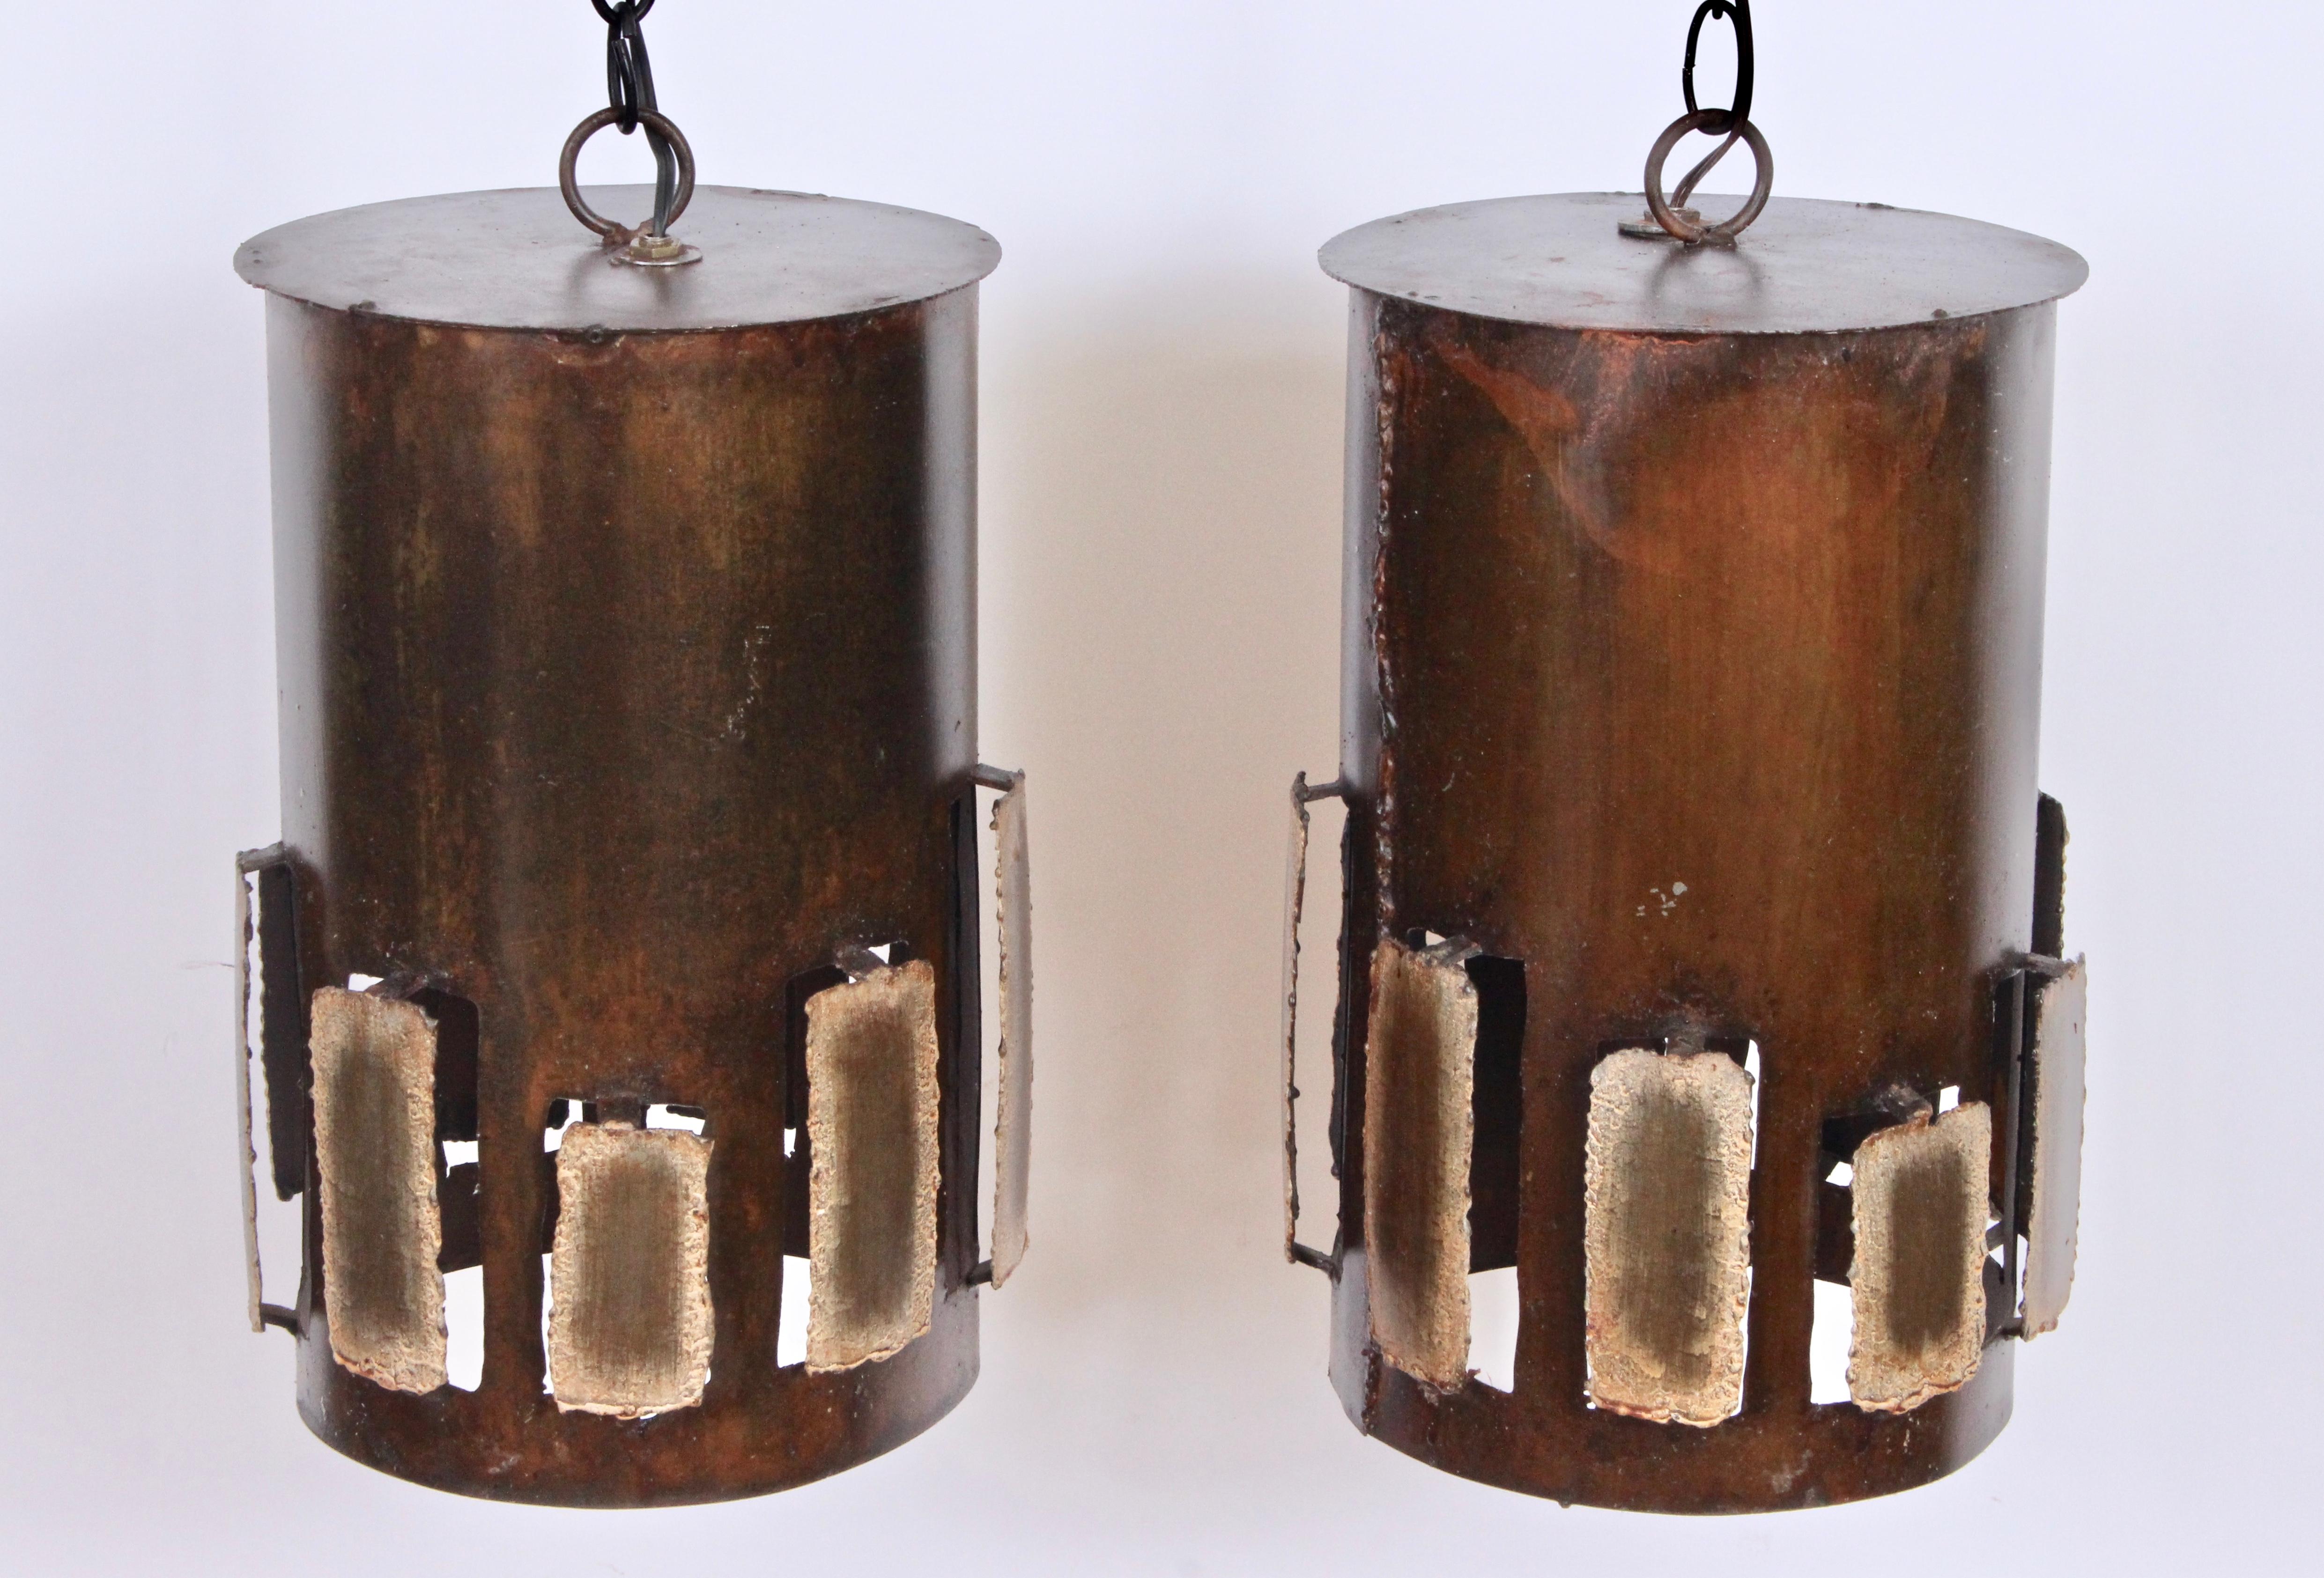 Pair of large art studio torched Brutalist brass hanging lamps in the manner of Harry Balmer, 1960s. Featuring handcrafted vented brass cylinders with applied cut outs and patinated bronze brass appearance. With brass loop ring top. With 2 5.5